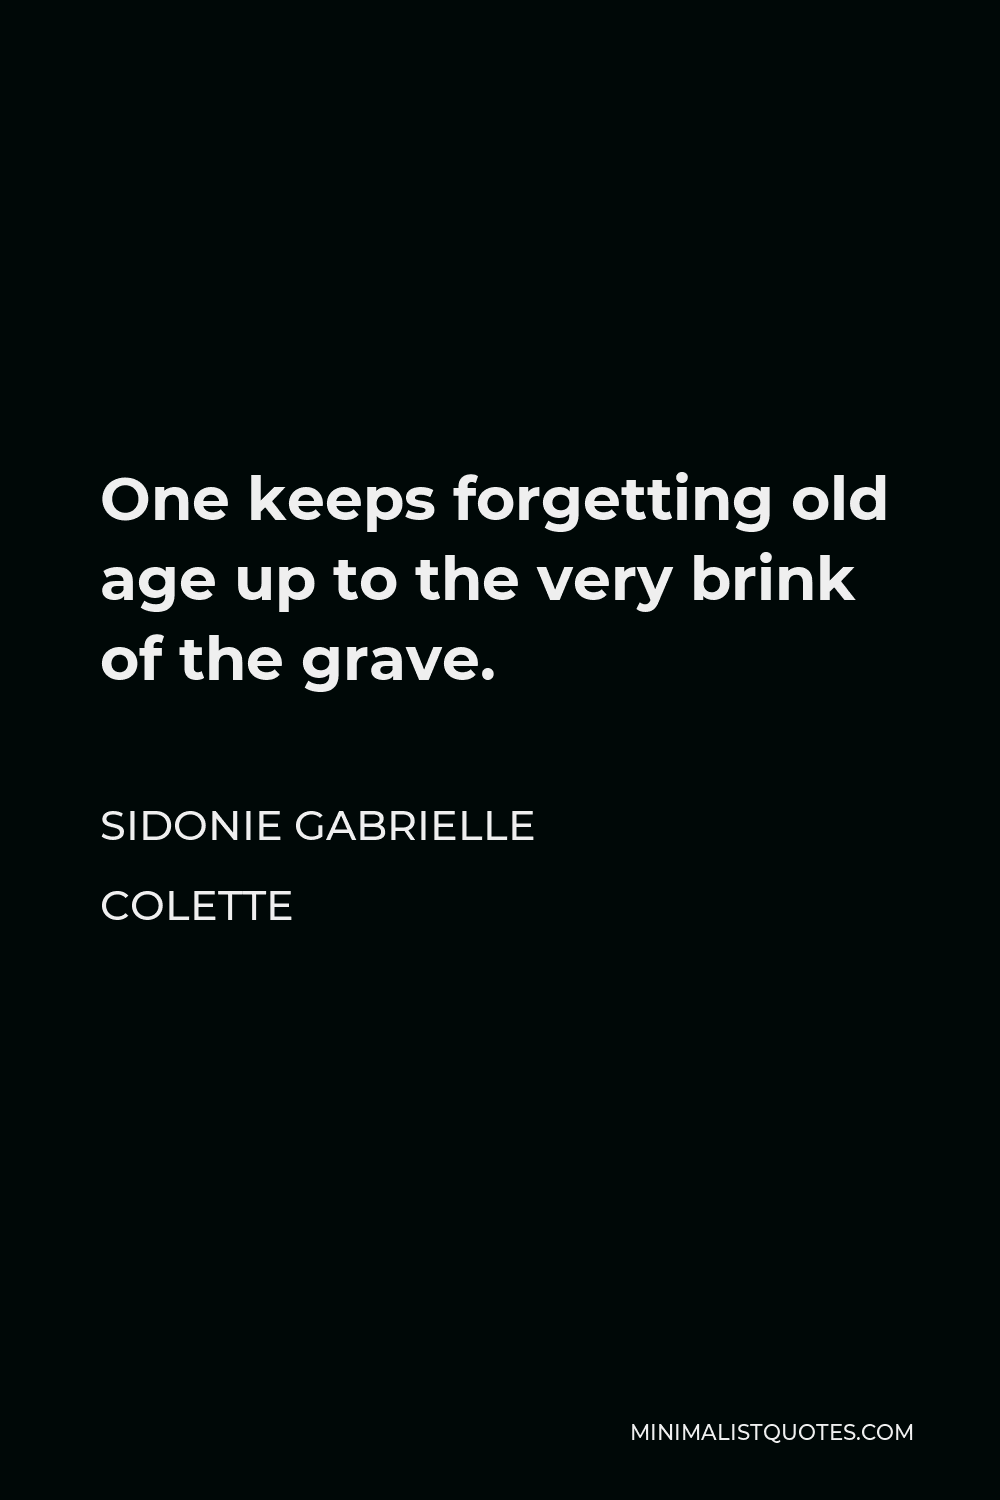 Sidonie Gabrielle Colette Quote - One keeps forgetting old age up to the very brink of the grave.